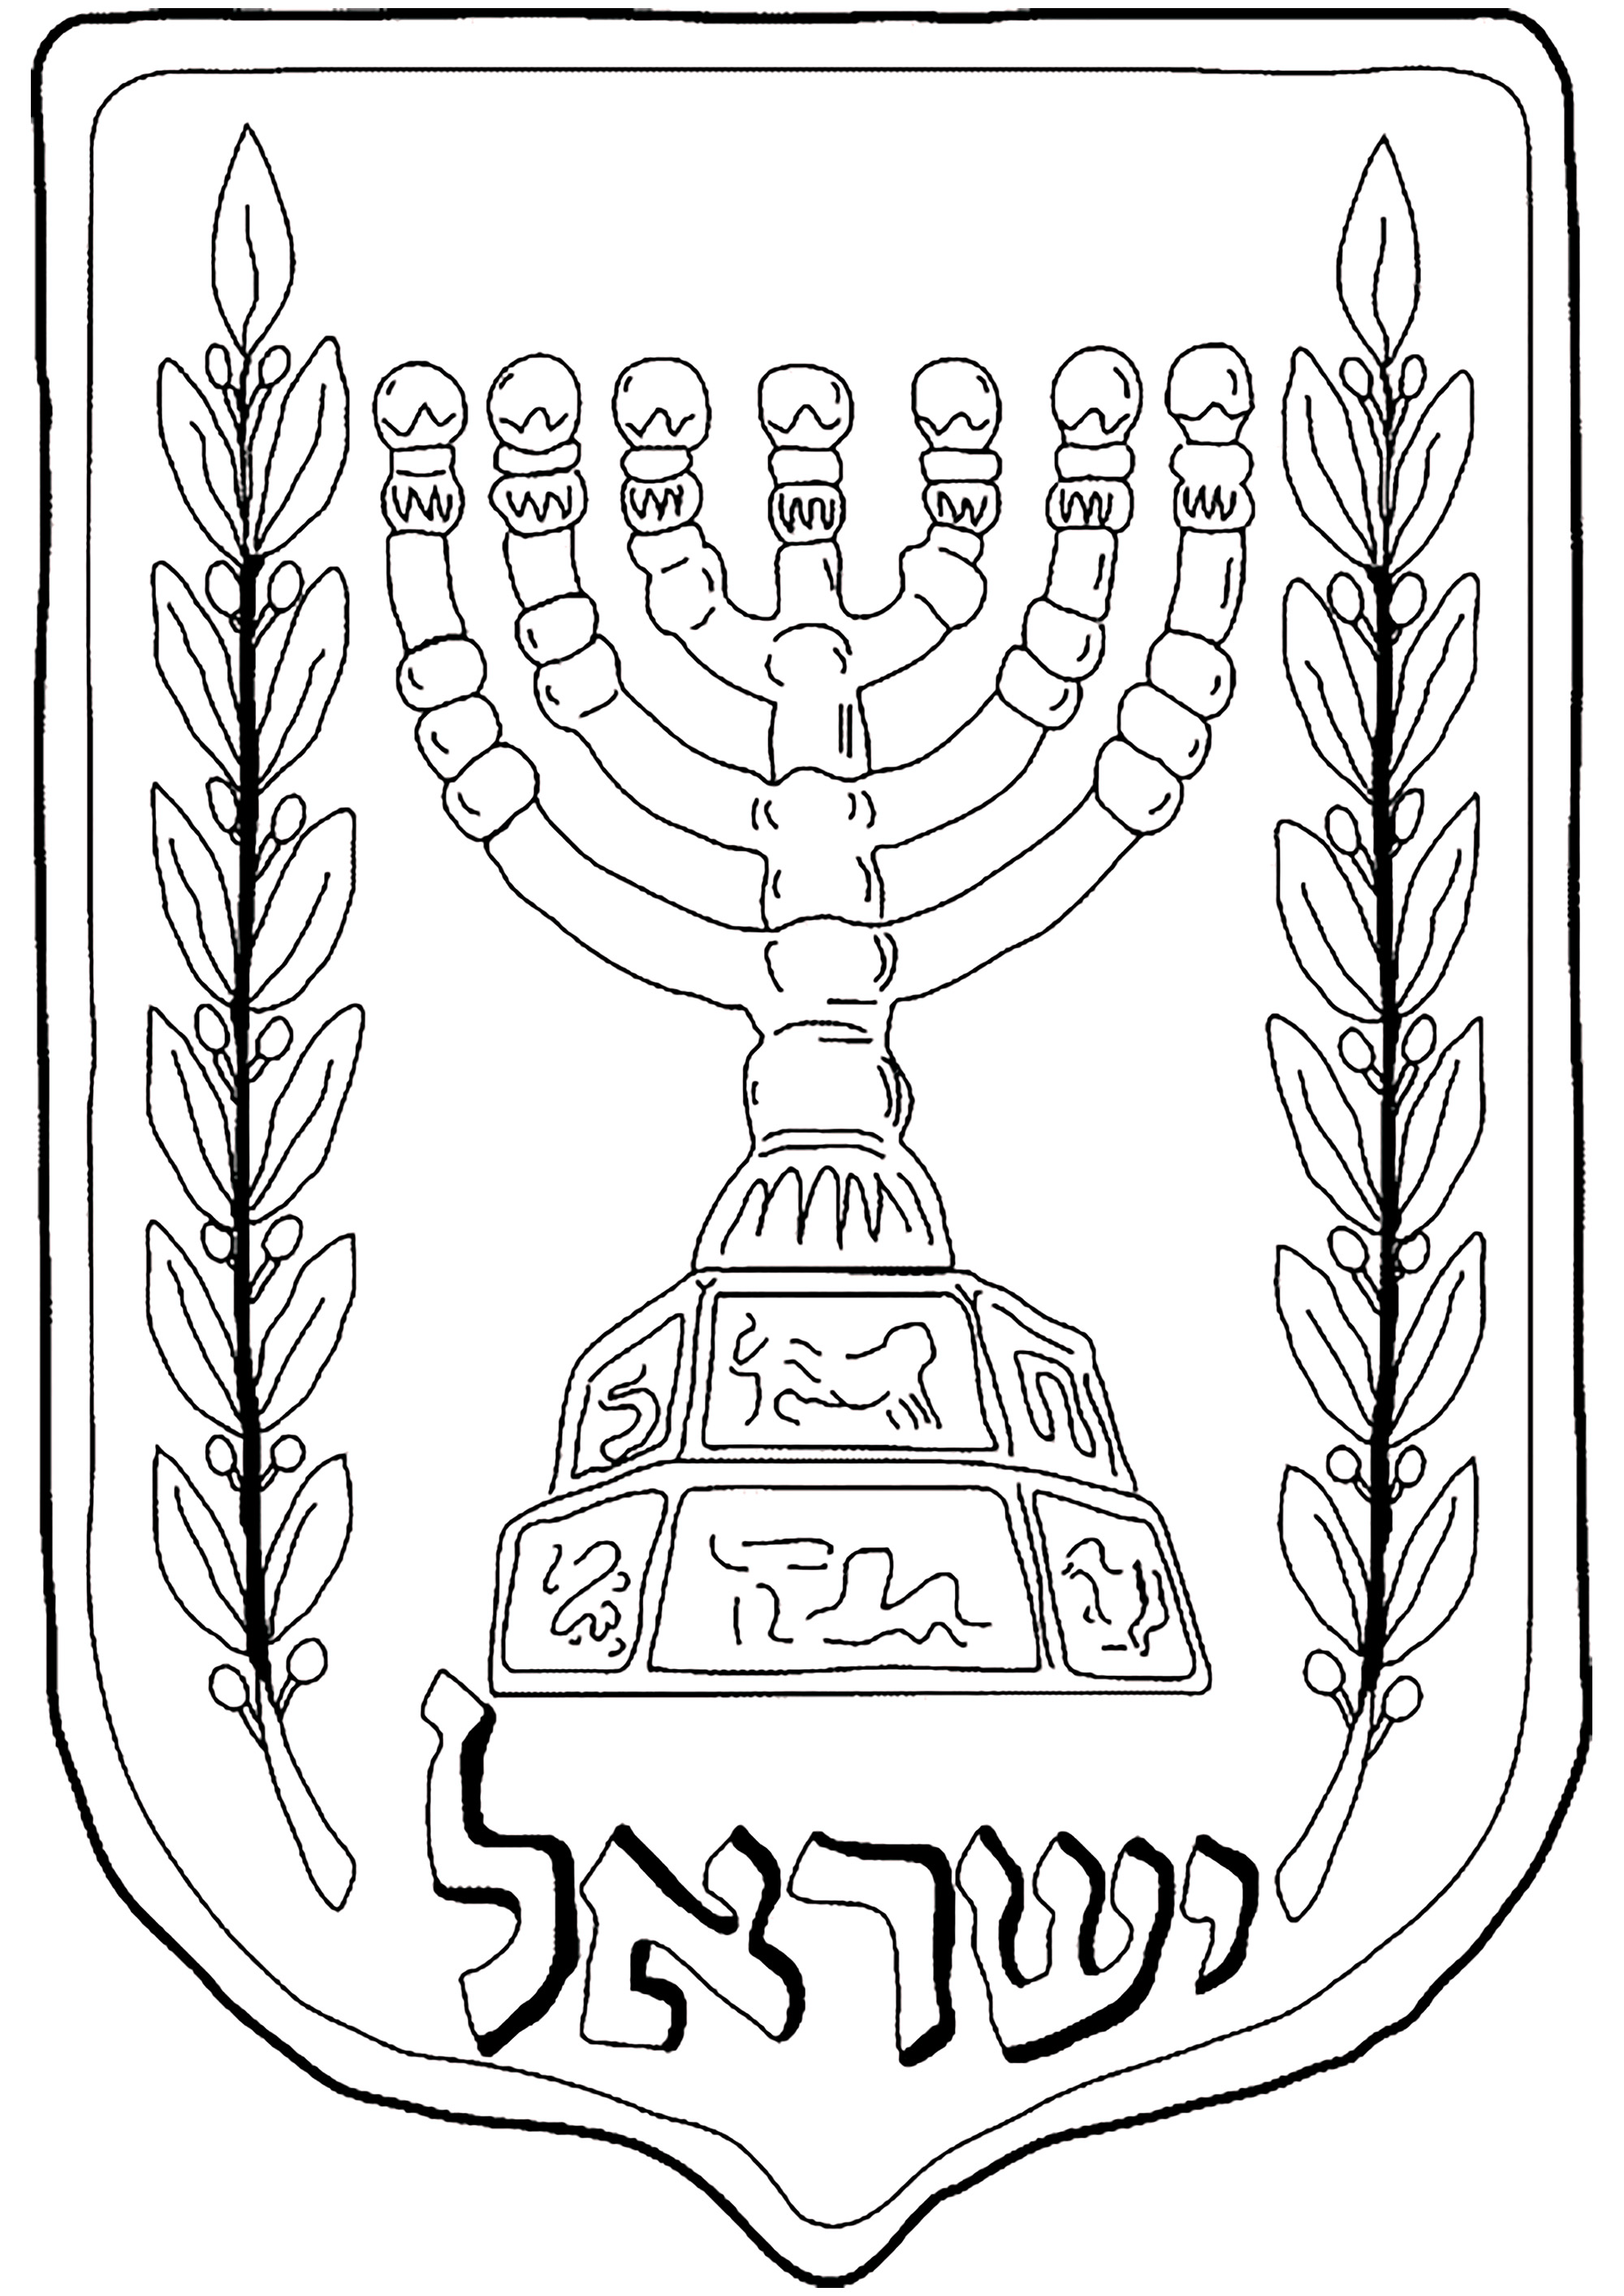 Drawing of the Menorah with other elements to color